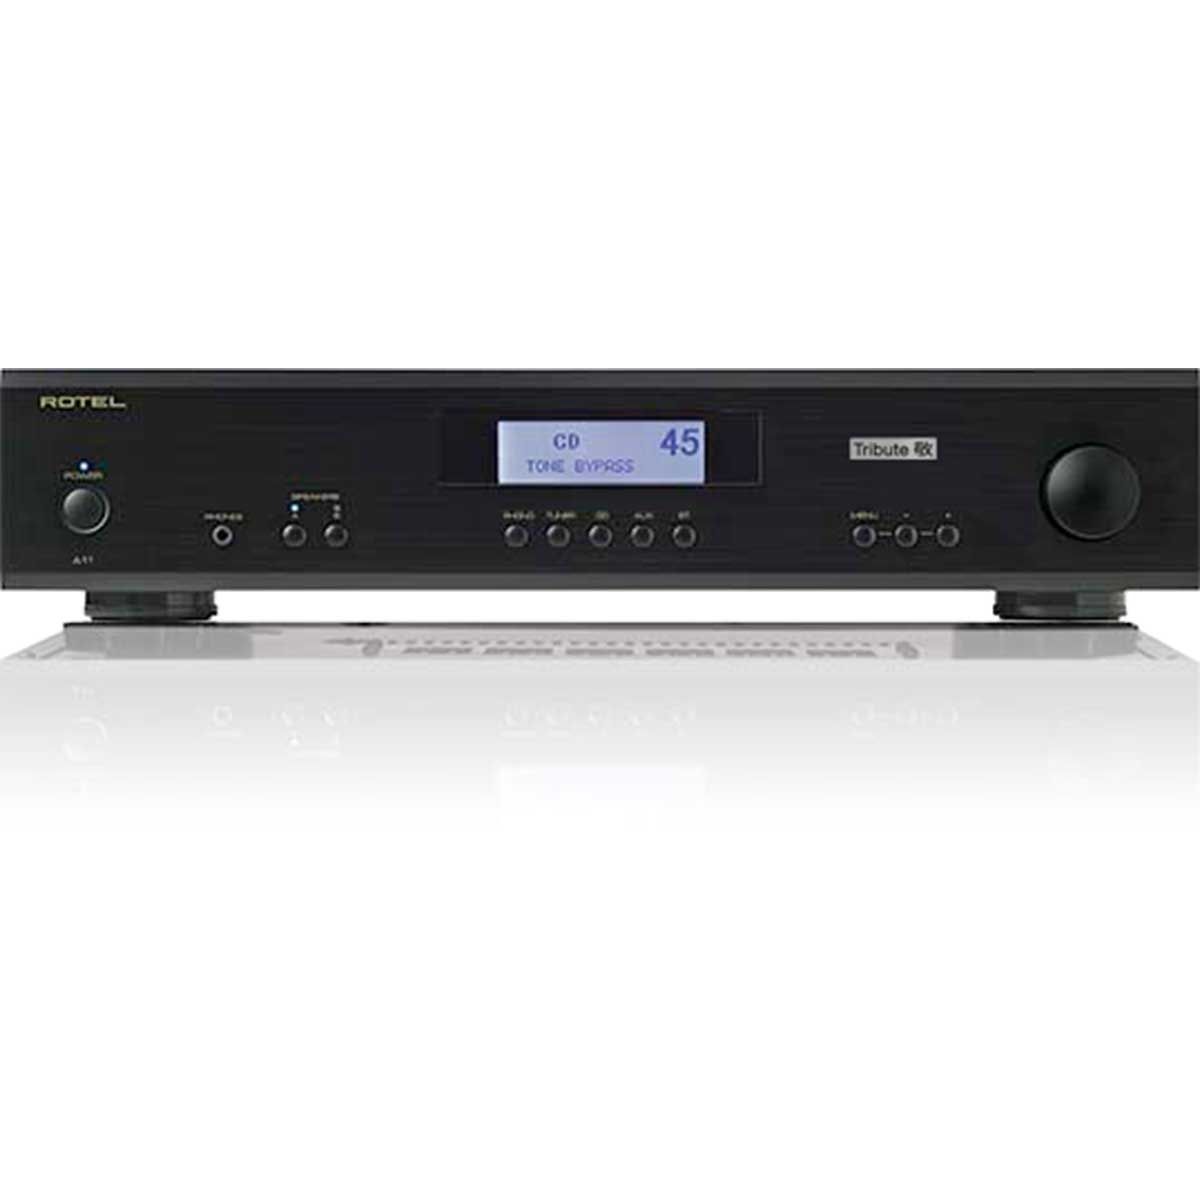 Front view Rotel A11 Tribute 50 Watt Stereo Integrated Amplifier - Black 